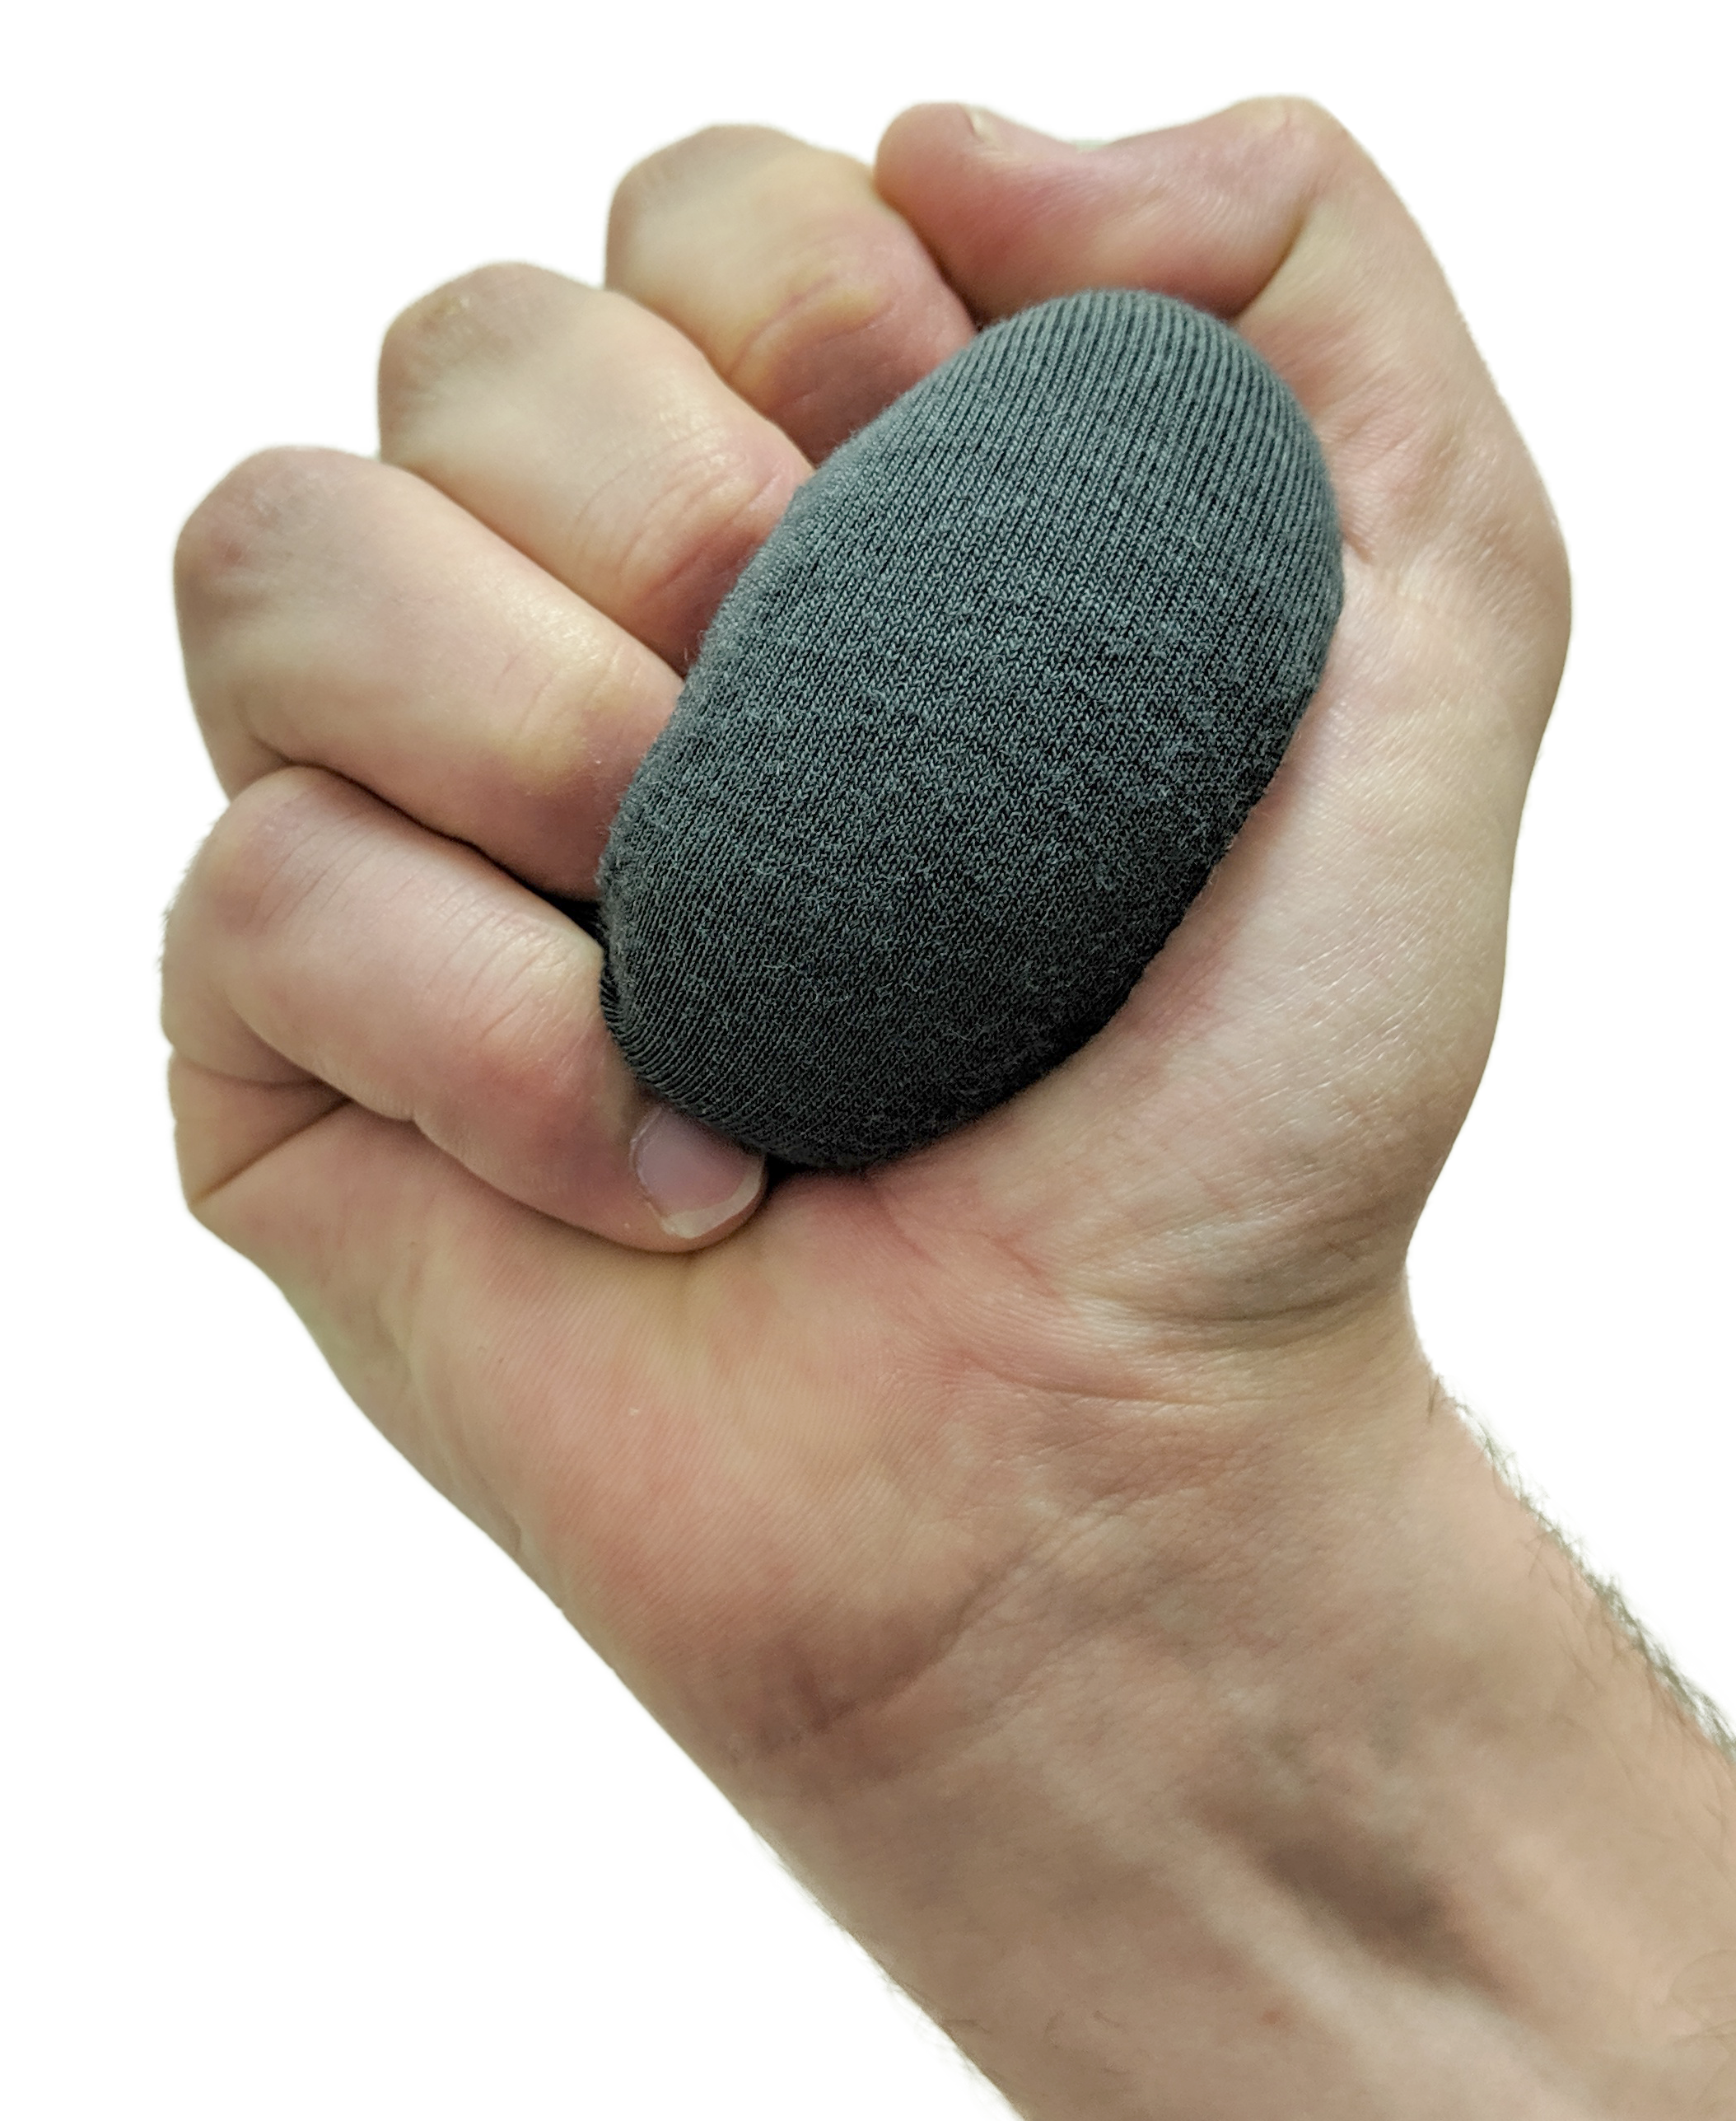 A hand with light skin tone is squeezing the Dark Grey Squeezibo.